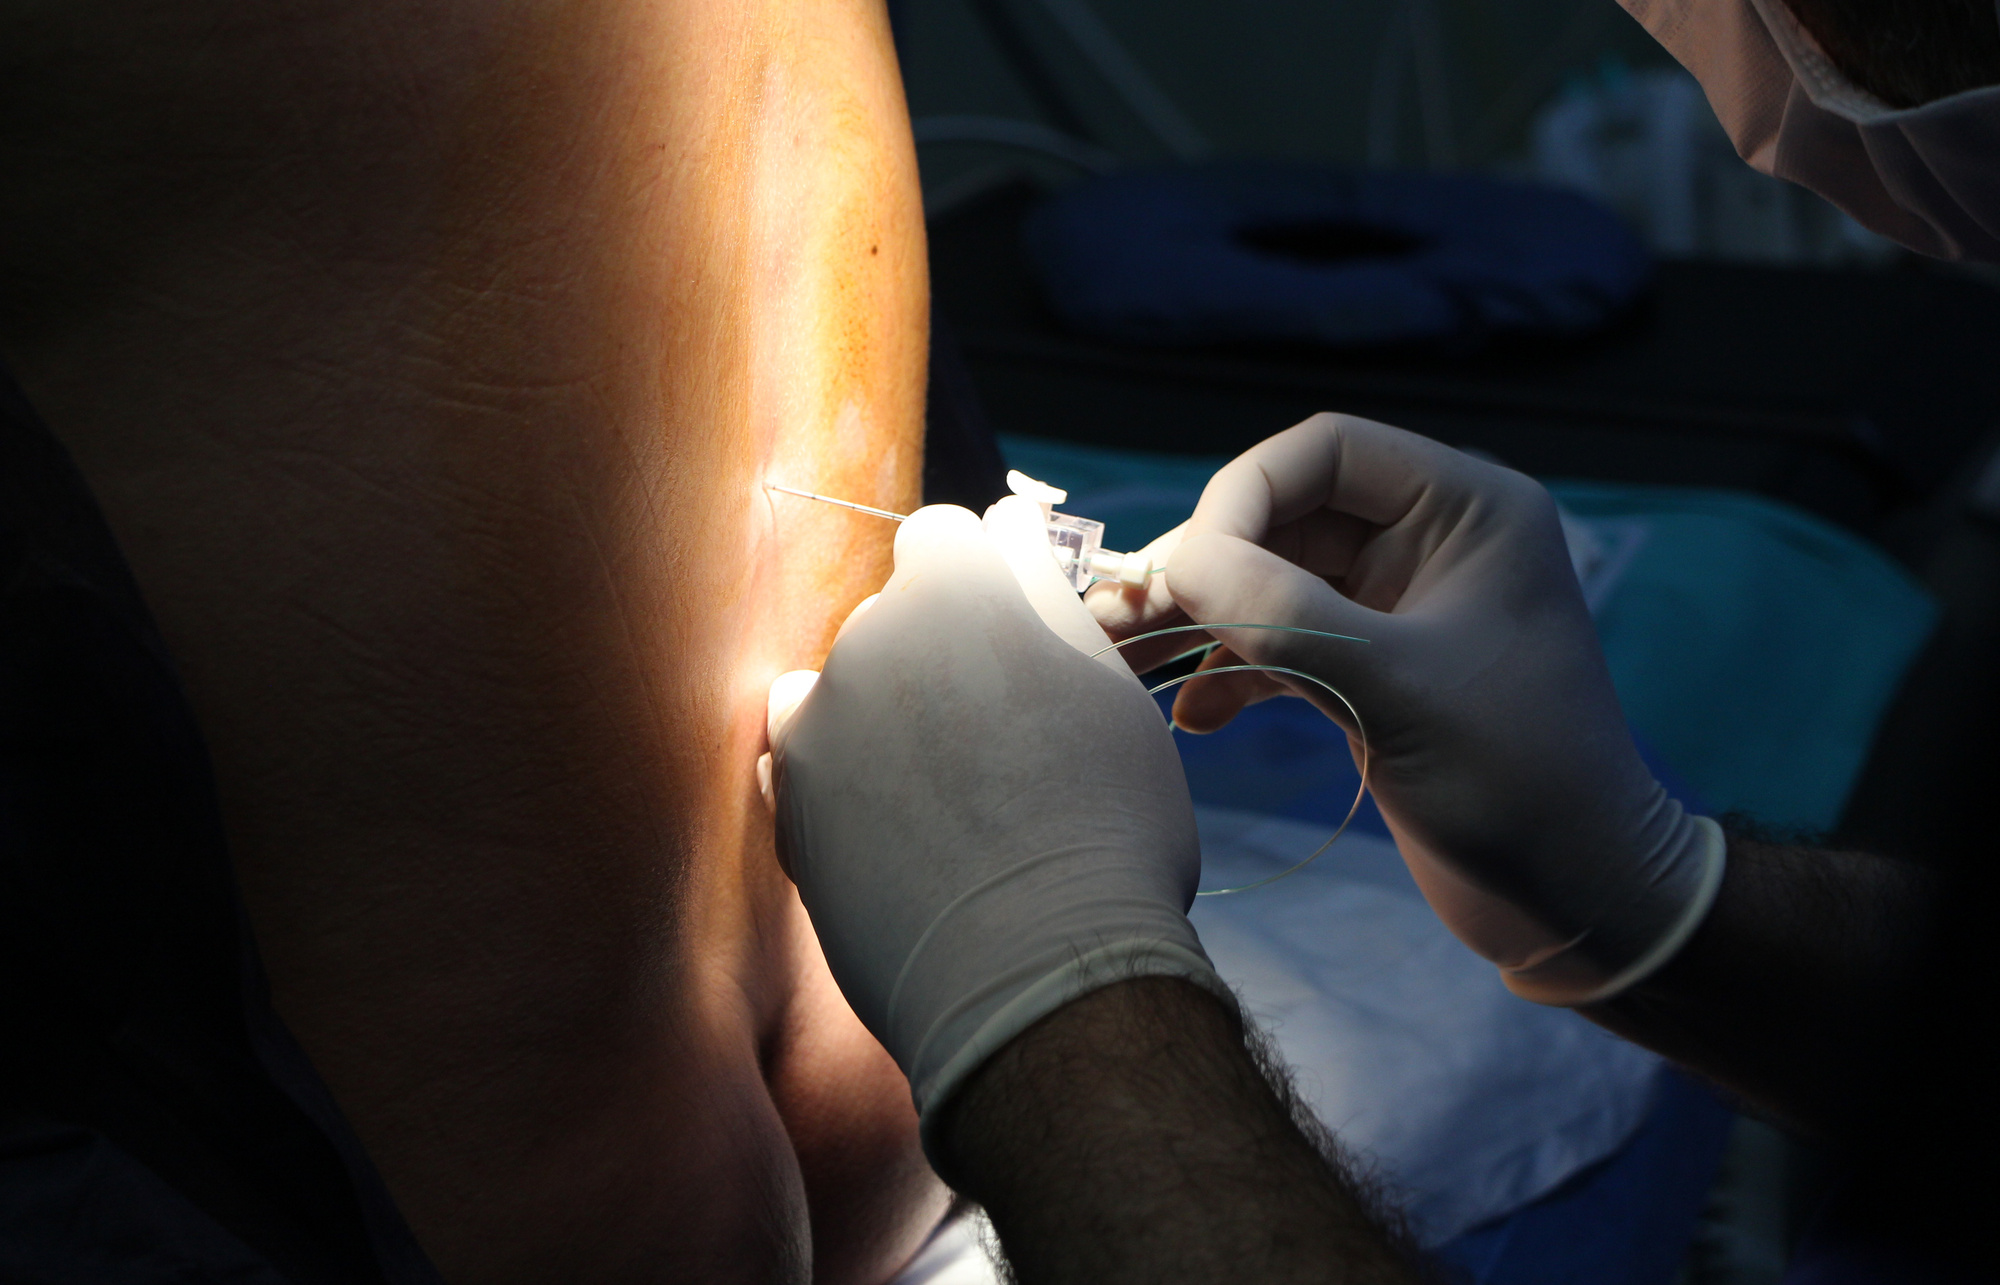 Are You a Candidate for Spinal Injections?